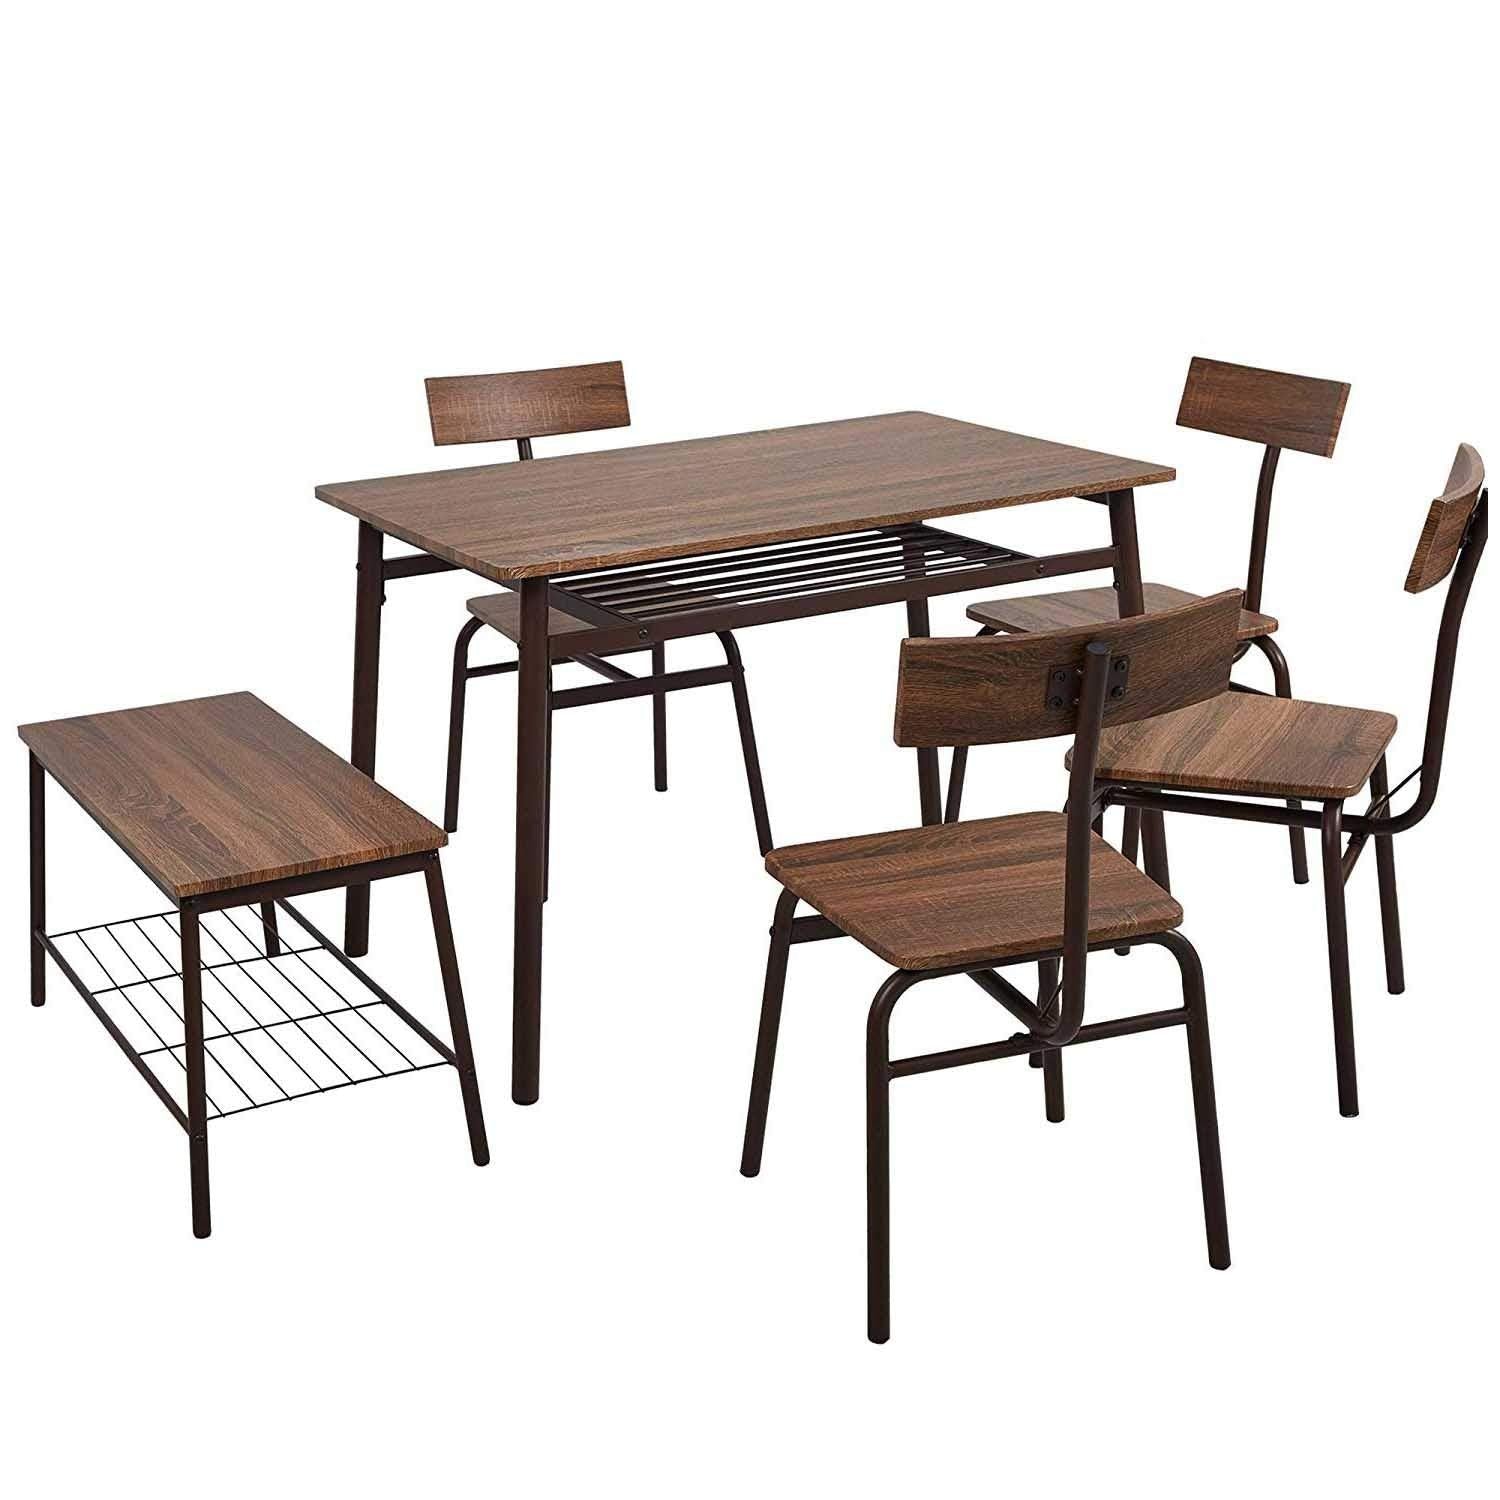 Bosonshop 6 Piece Wooden Dining Table Set, Bench Retro Style, Brown